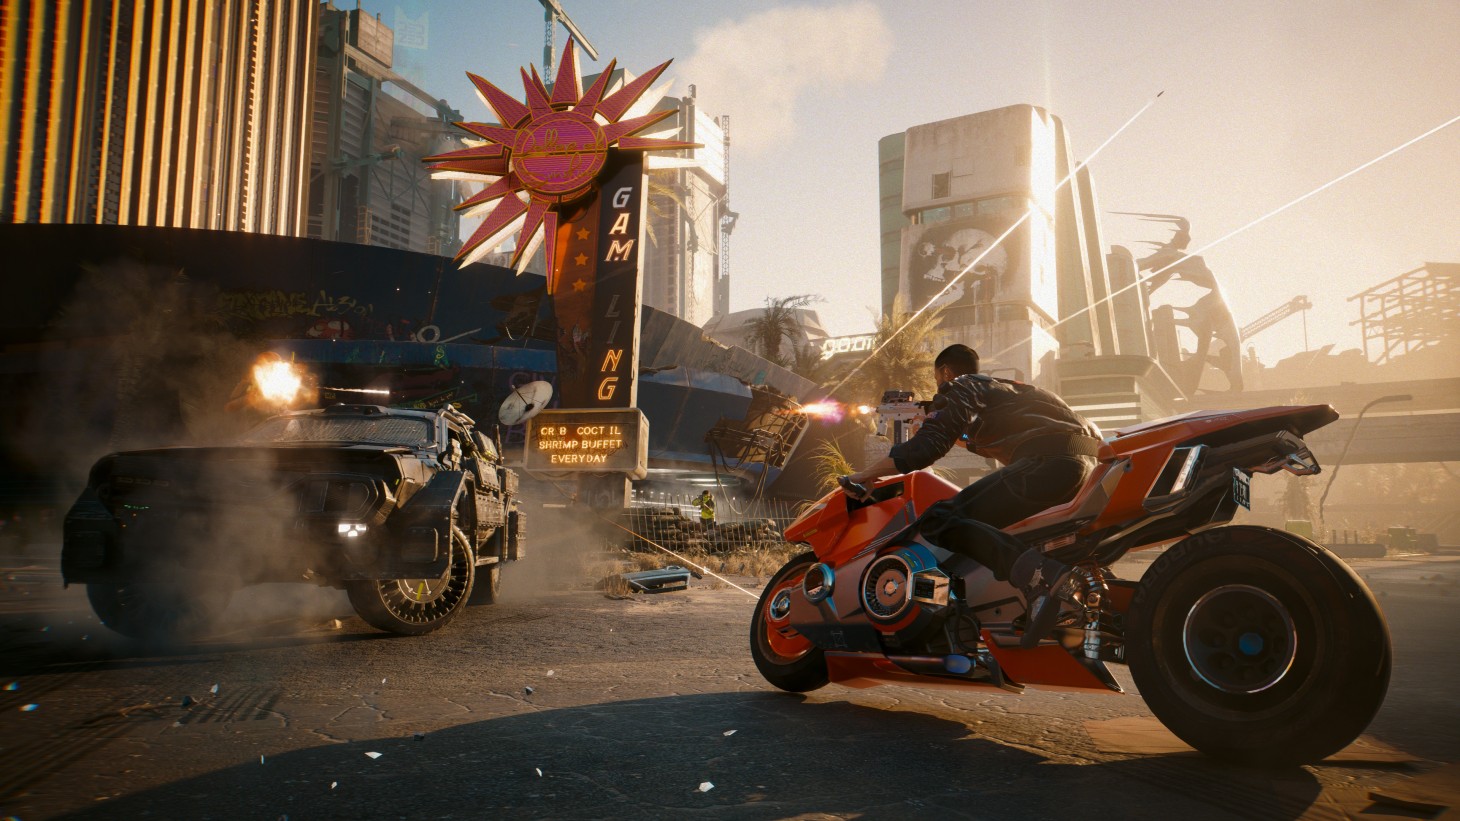 Download Explore the High-Definition World of Cyberpunk 2077